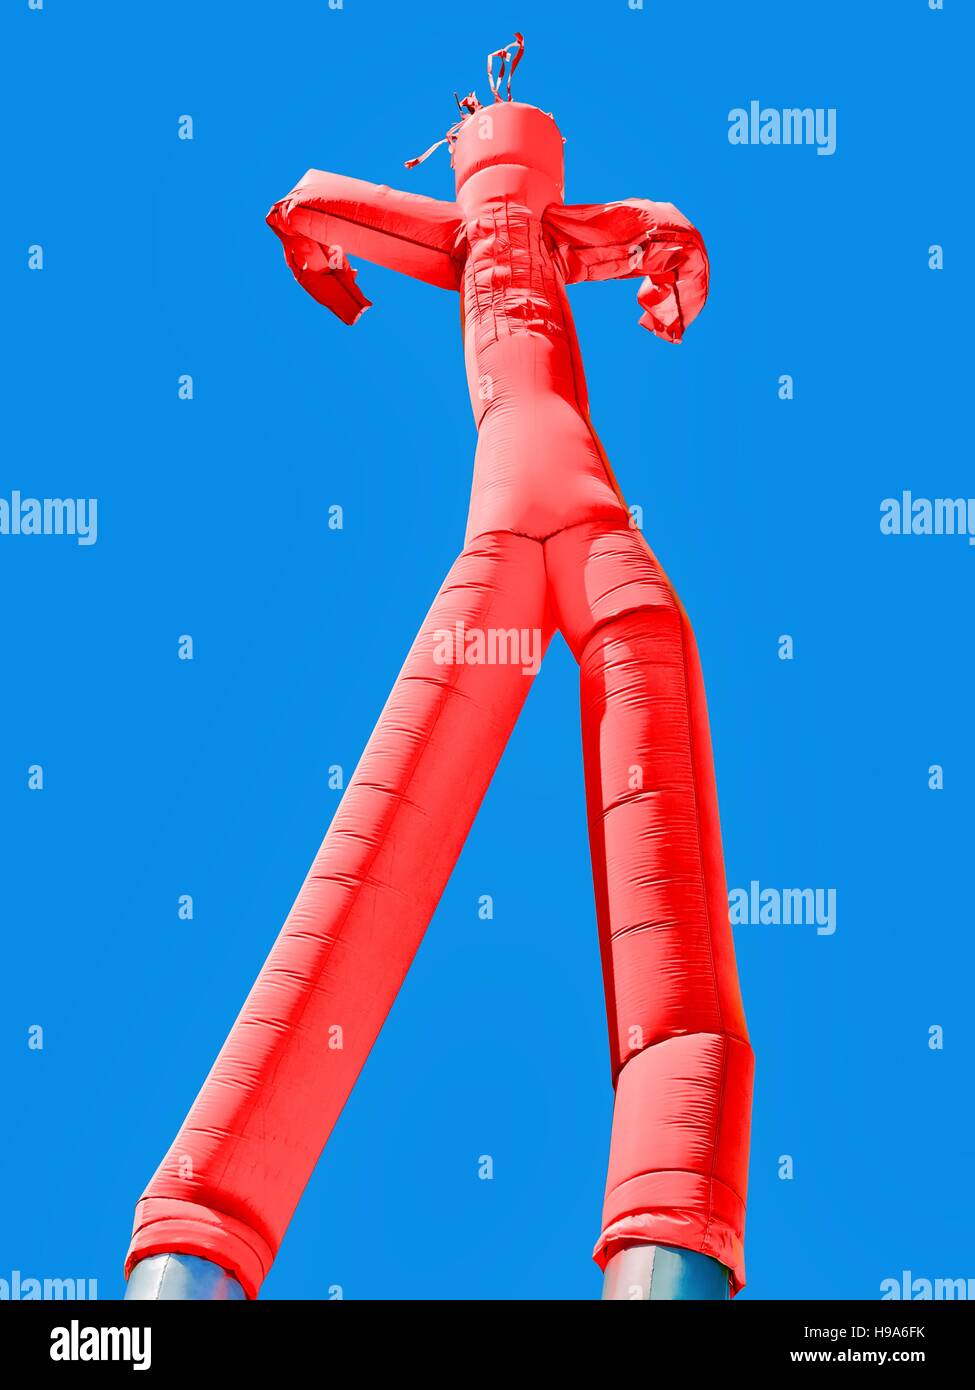 Red inflatable man on blue sky background Stock Photo